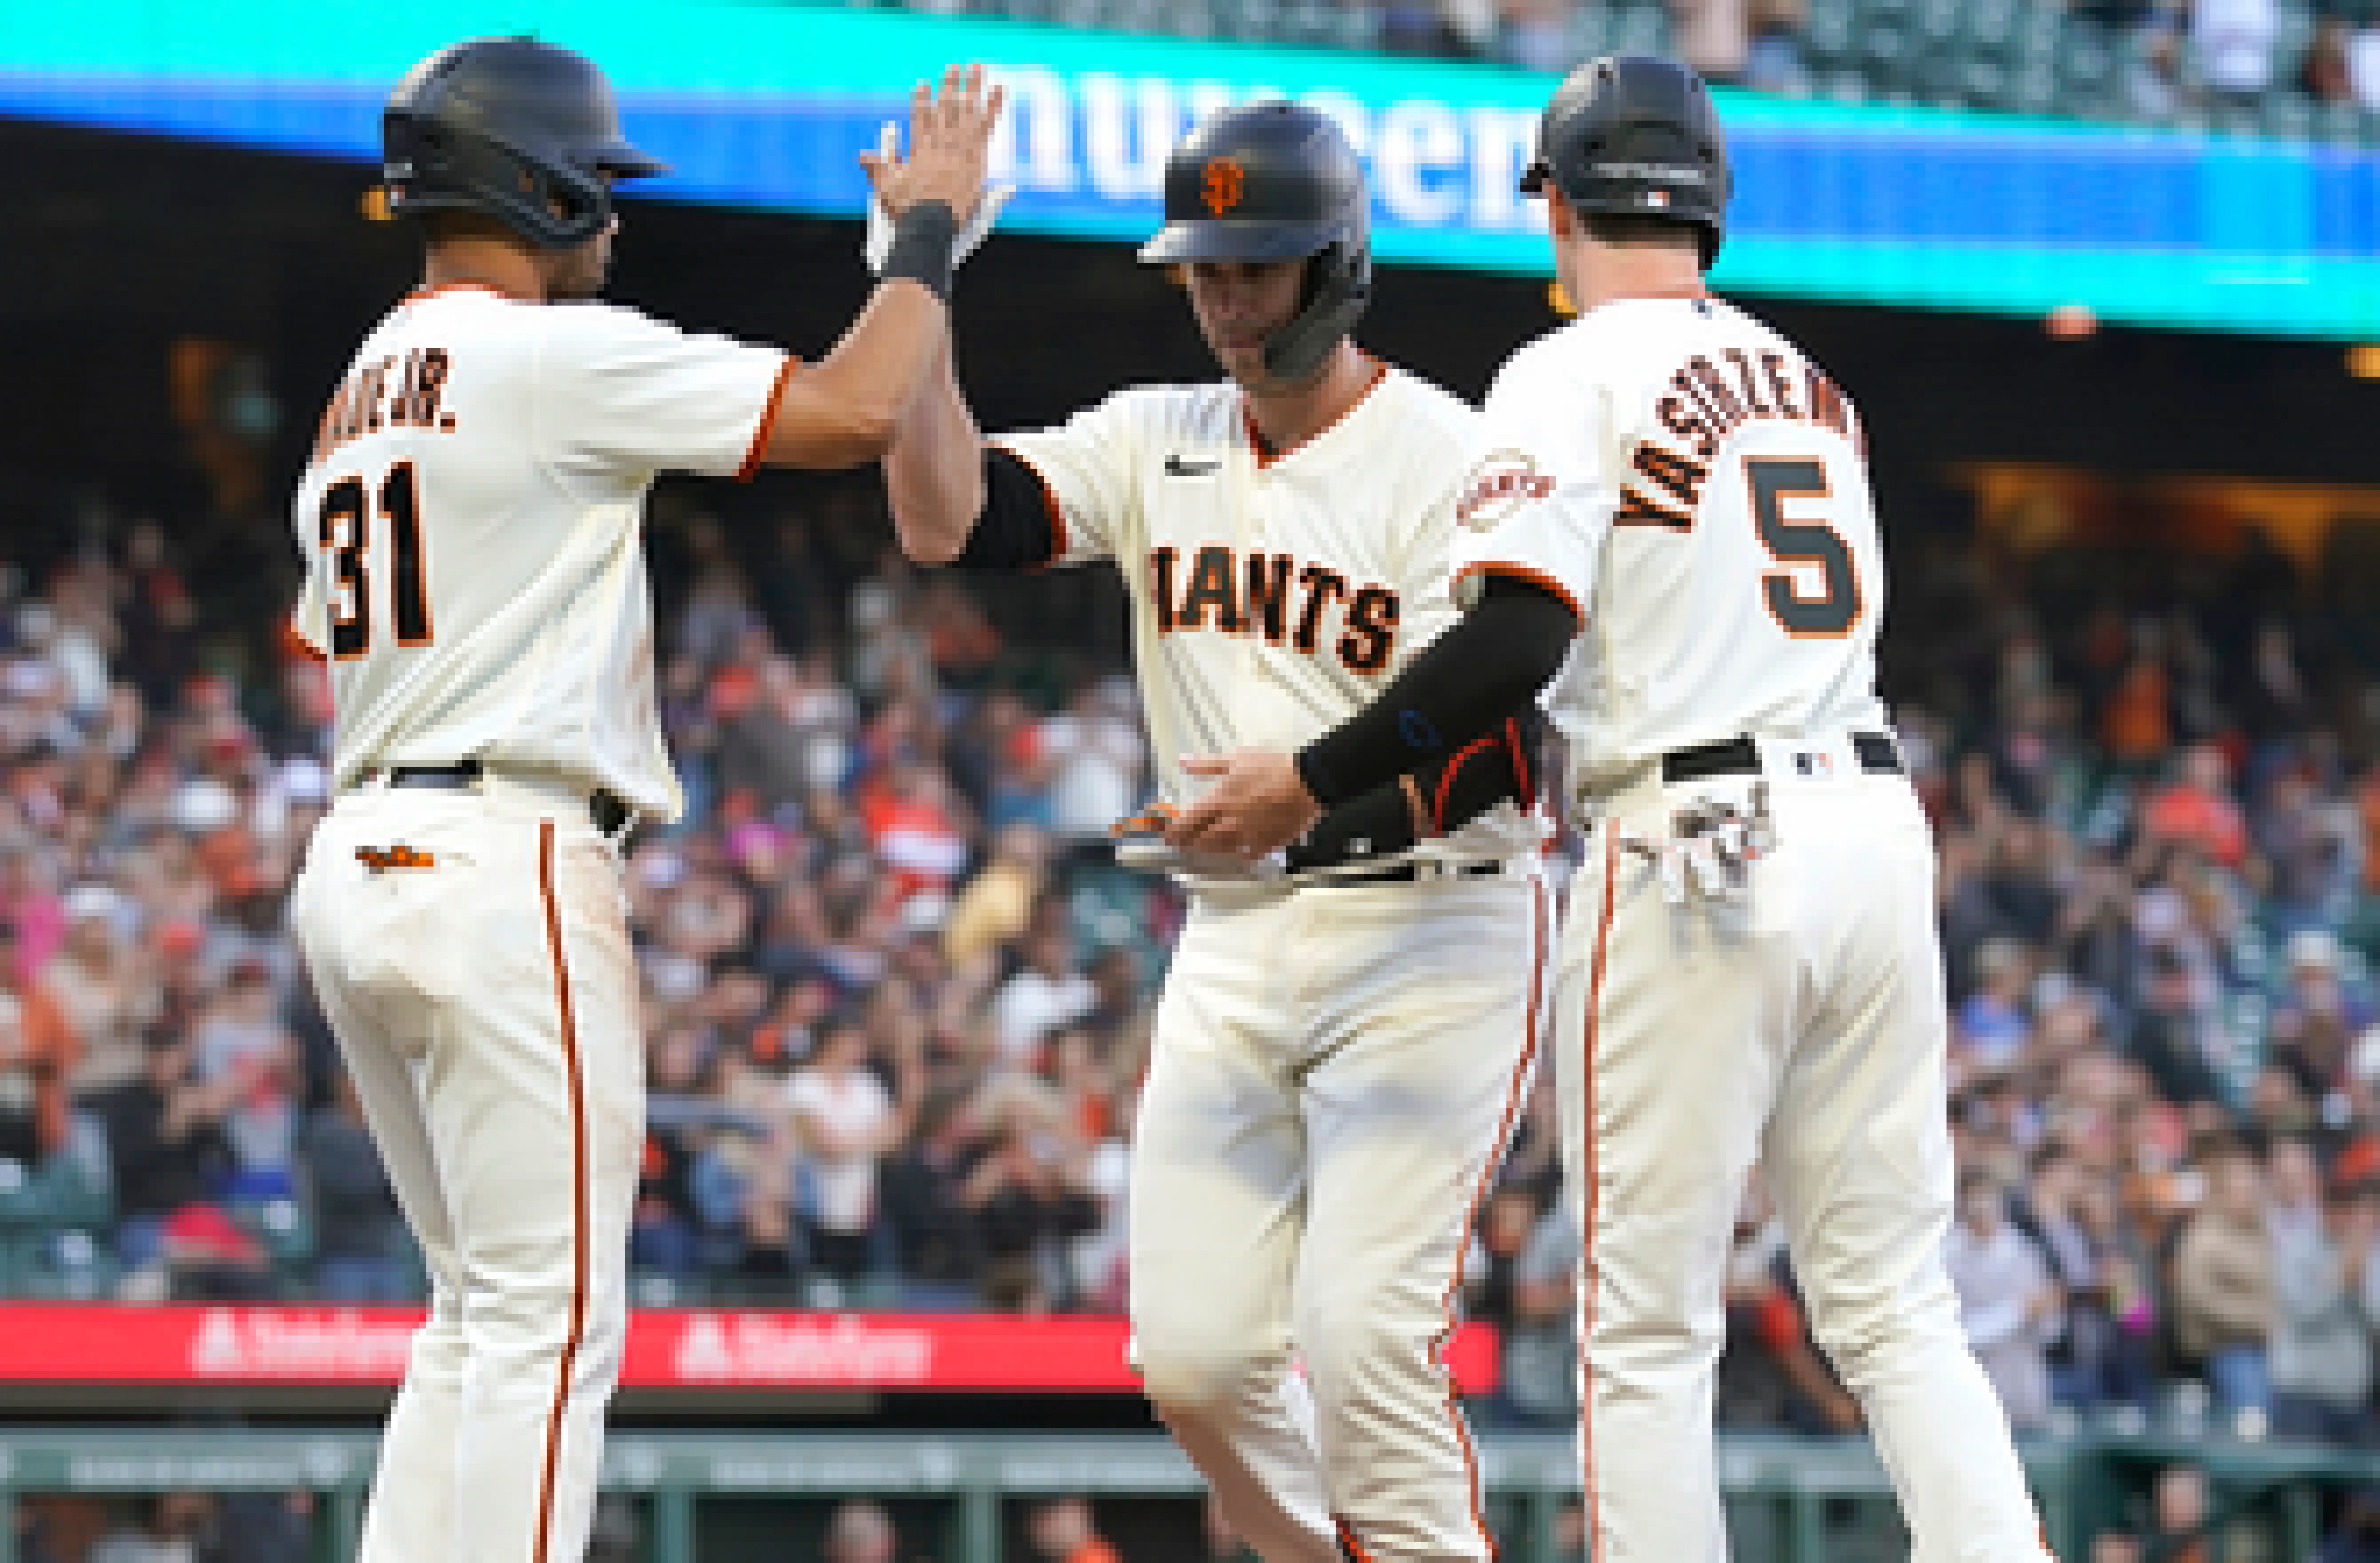 Giants hand D’Backs record-tying 22nd straight road loss in 13-7 thumping